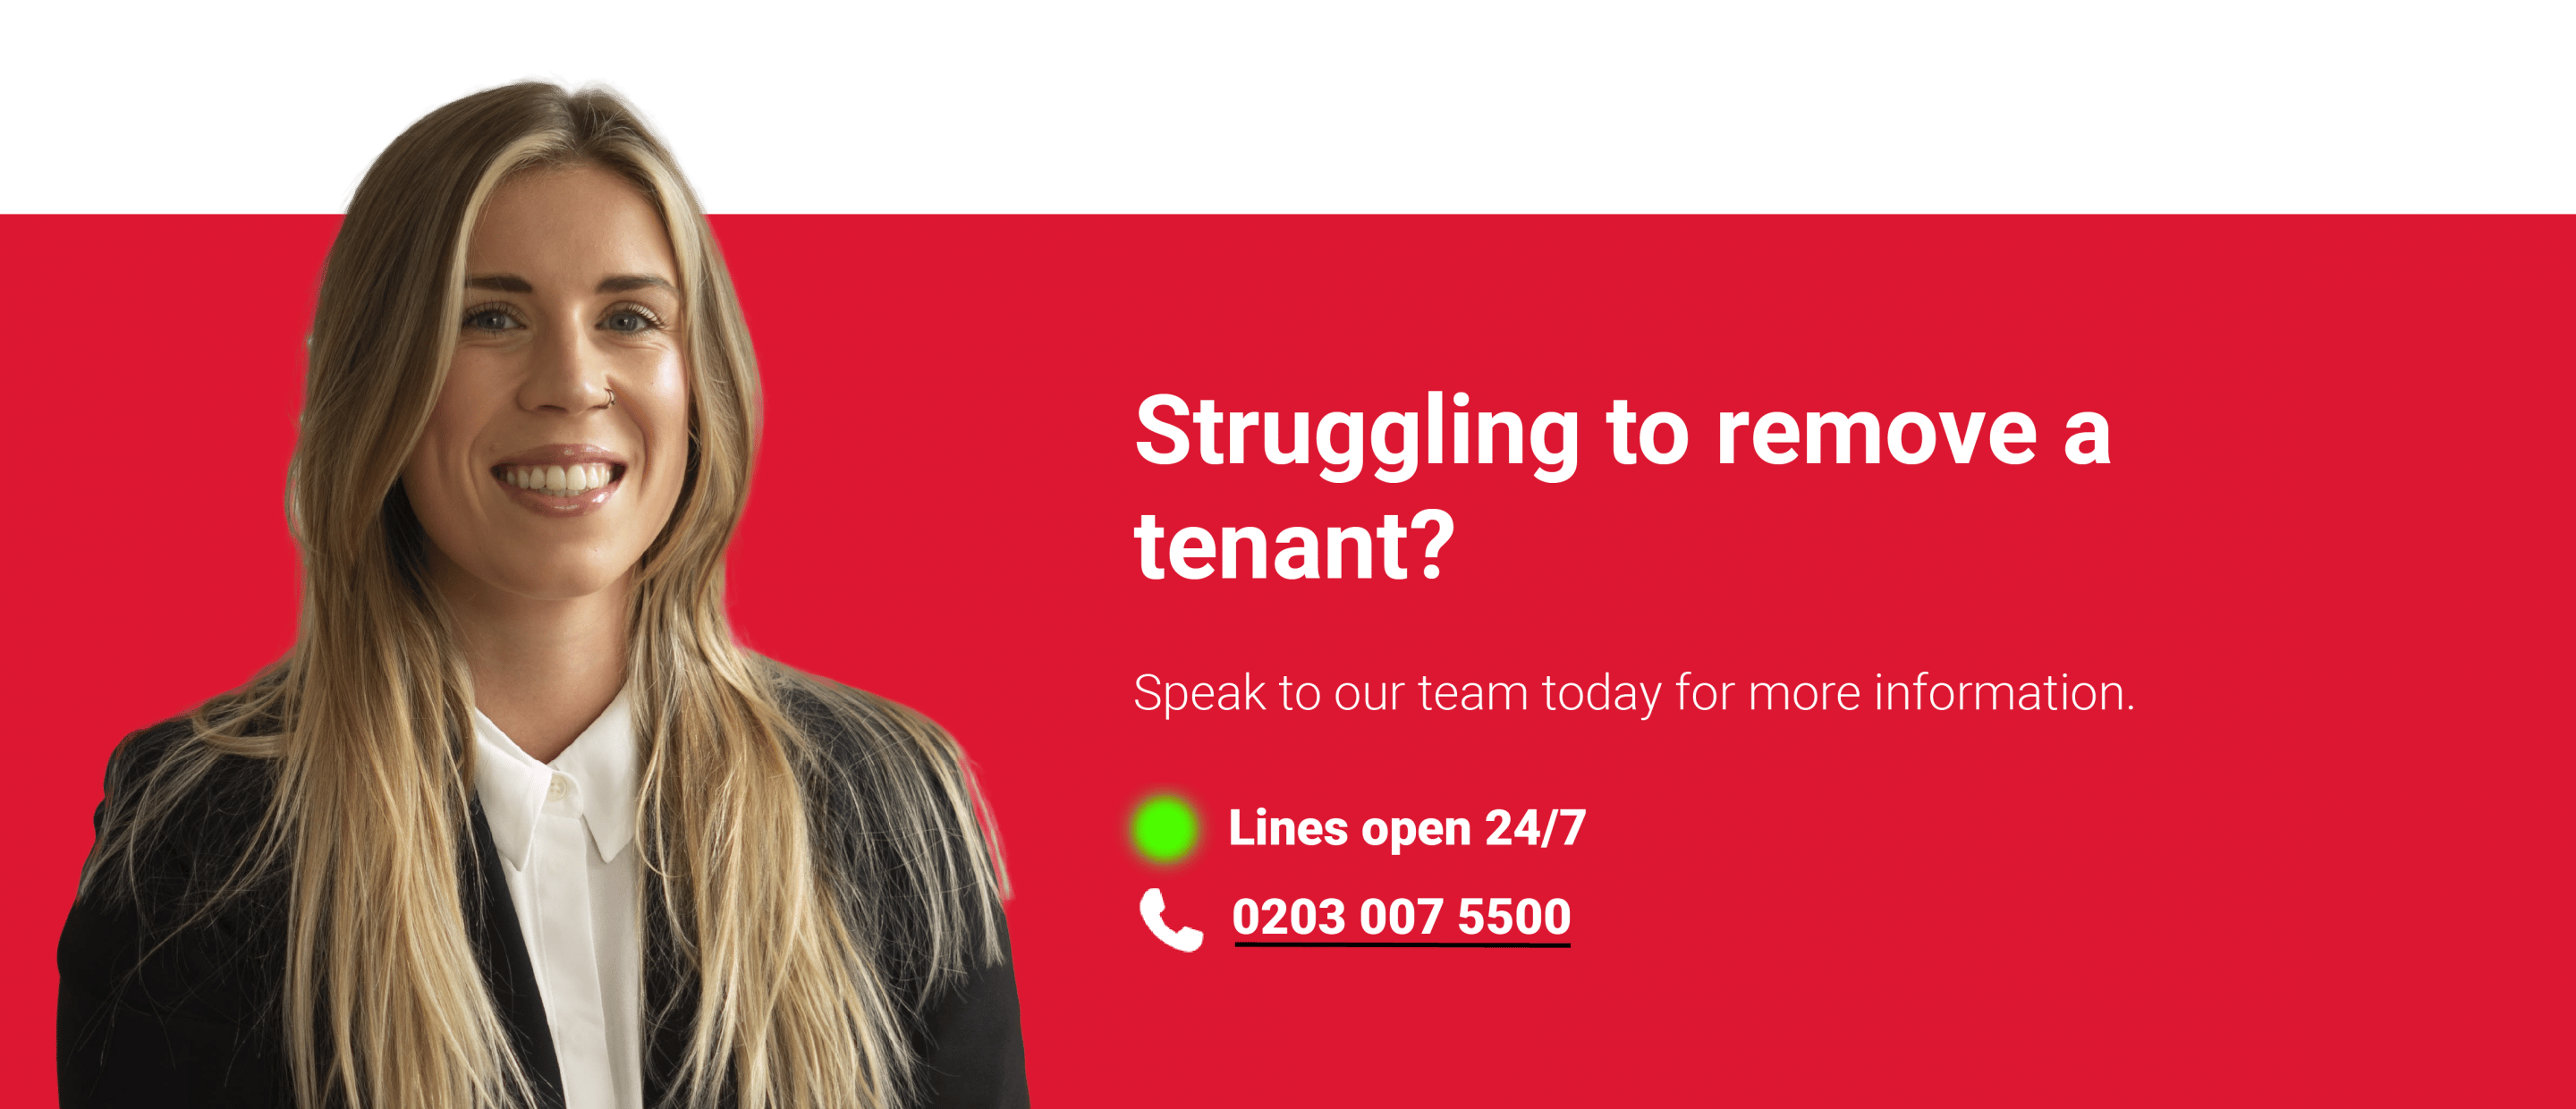 call to action on removing a tenant dt 1